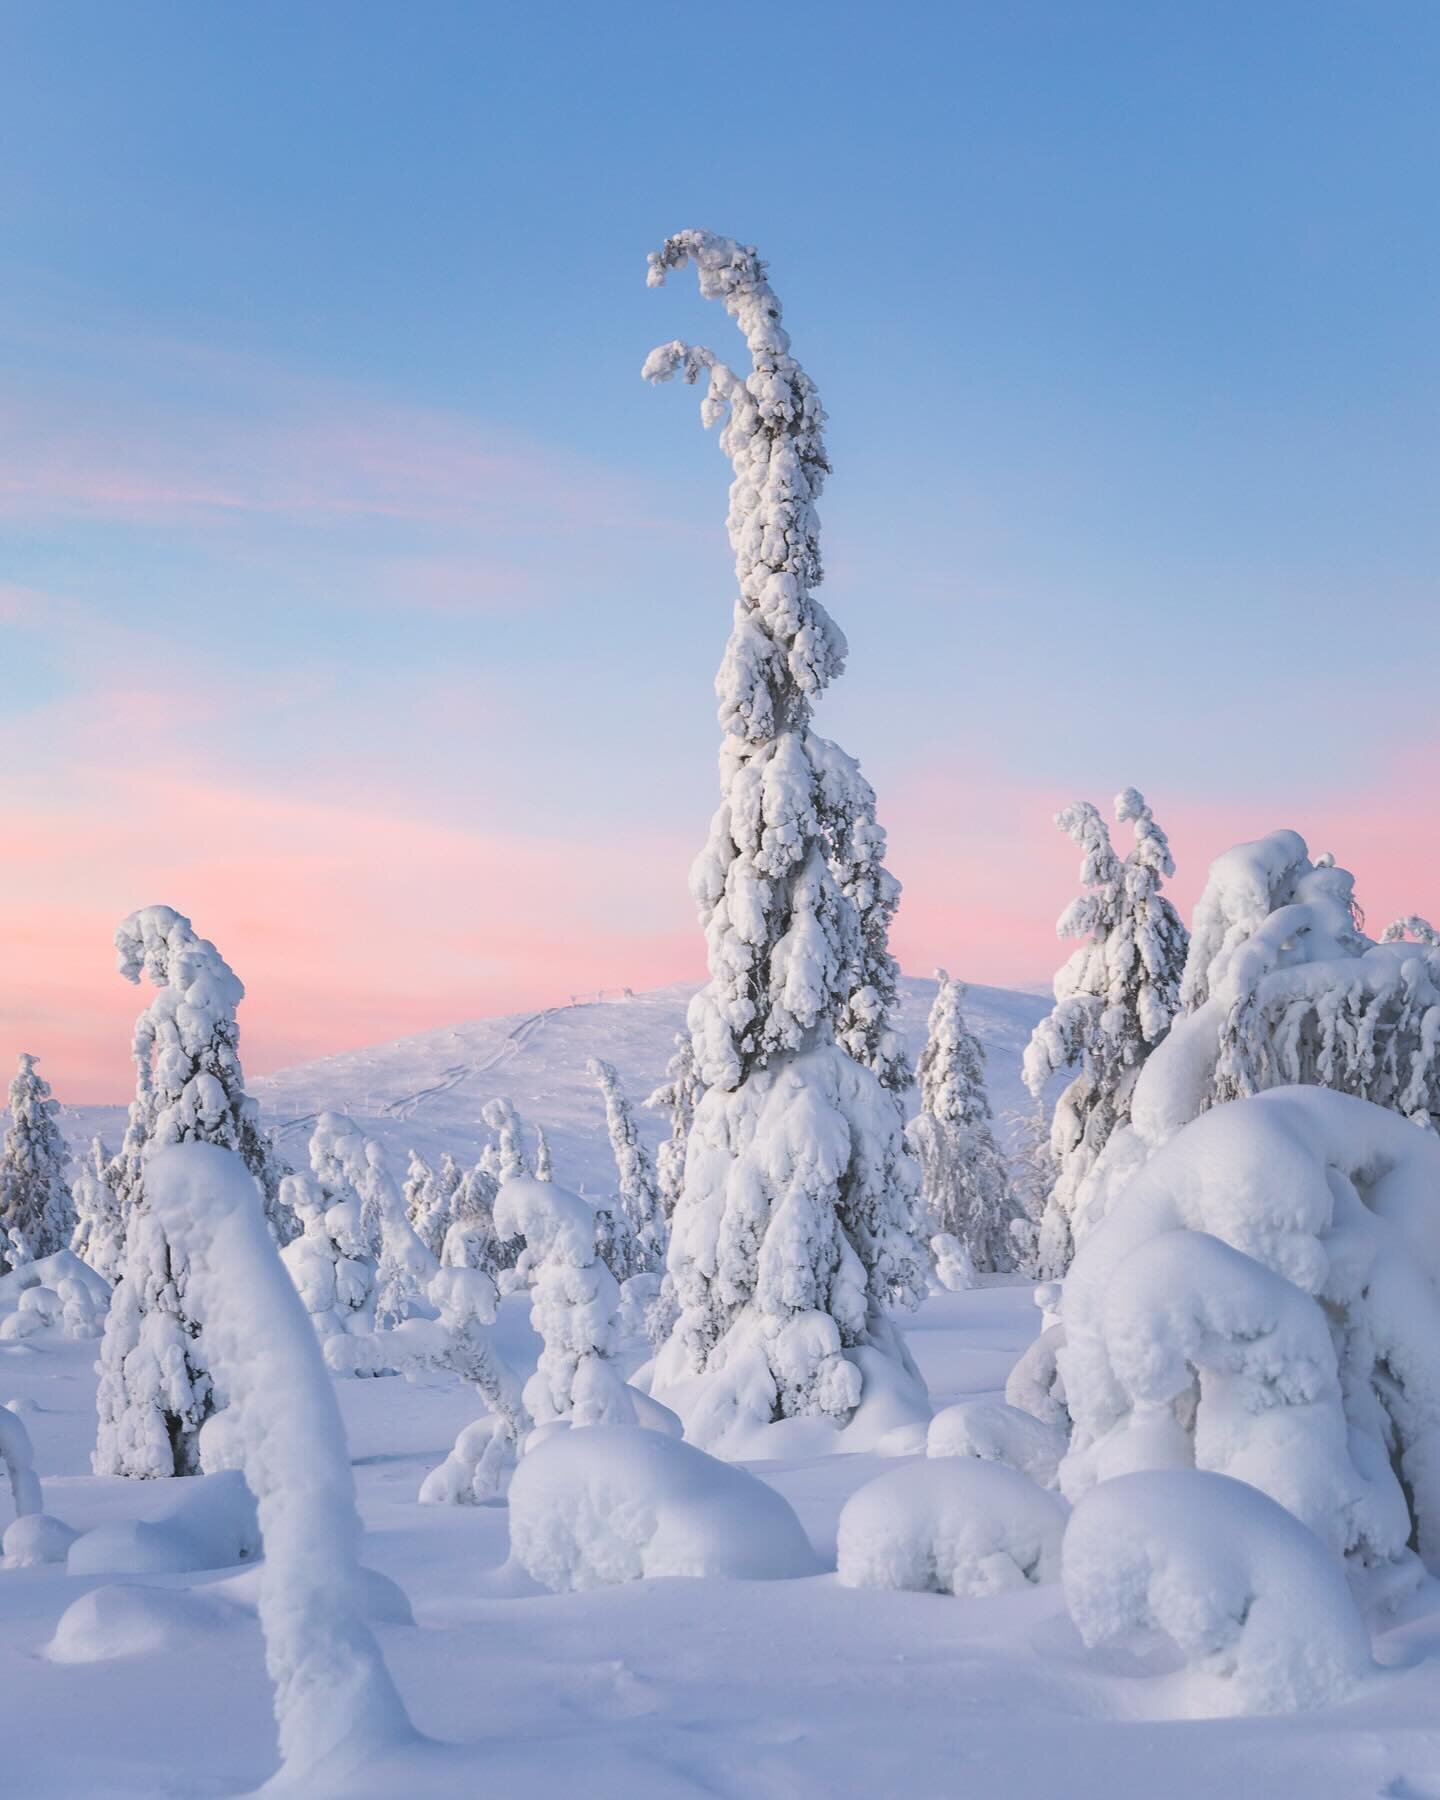 I know I&rsquo;ll miss these cold and snowy pastel colored days, but to be honest I&rsquo;m also looking forward to sunny spring days 🤍

#lapland #finland #muonio #lappi #stayandwander #canonnordic #ourplanetdaily #discoverearth #pallas #pallasyll&a